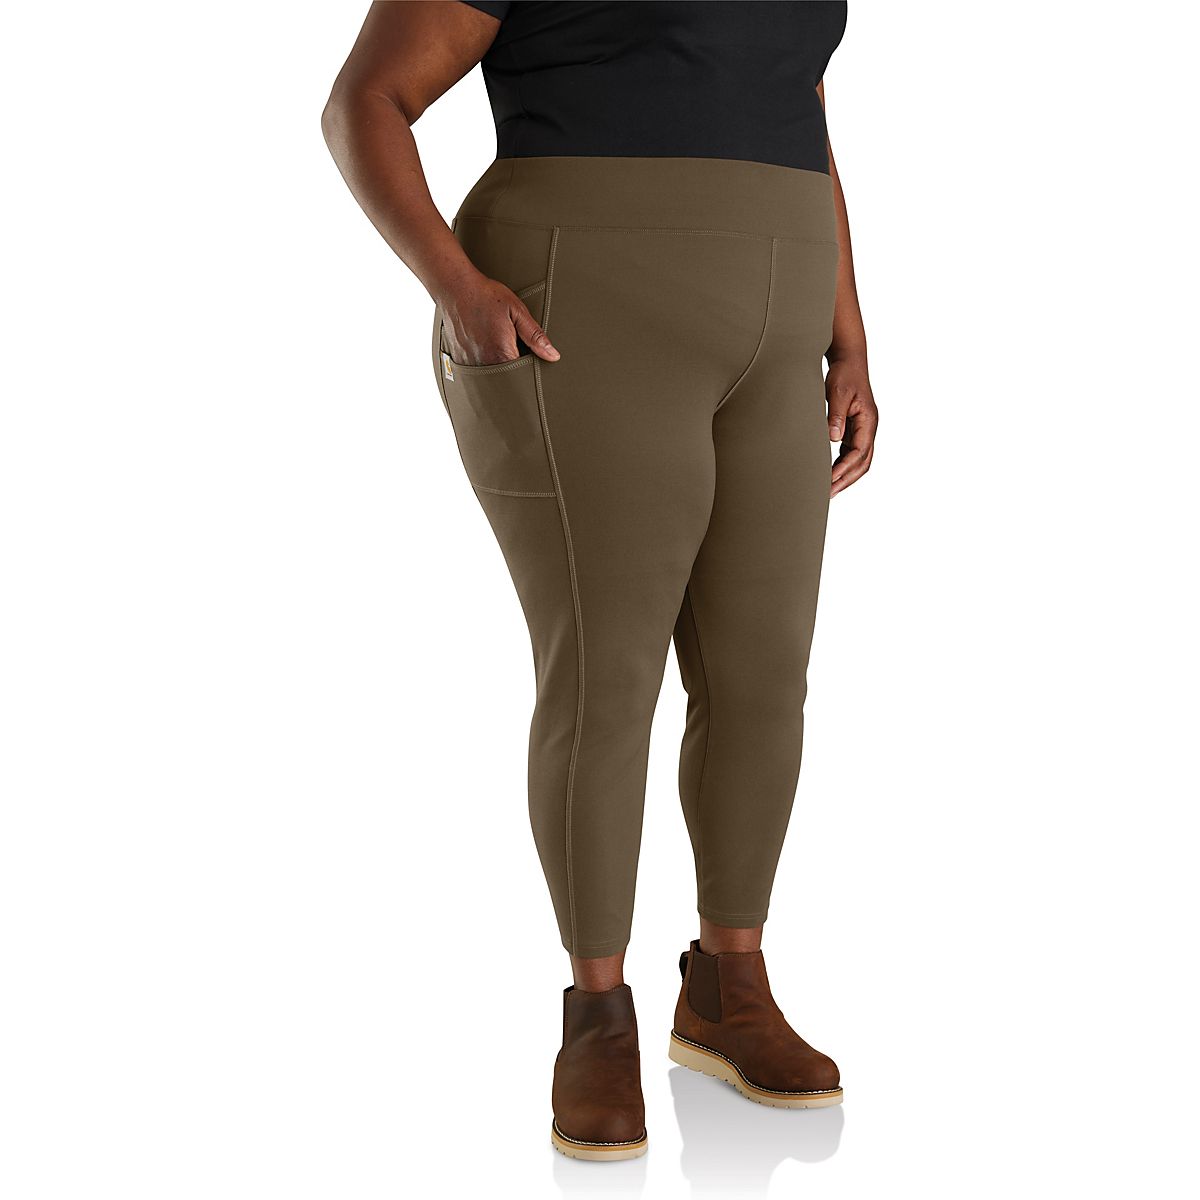 CarharttwomensForce Fitted Heavyweight Lined Legging (Plus Size)BlackSmall  Tall